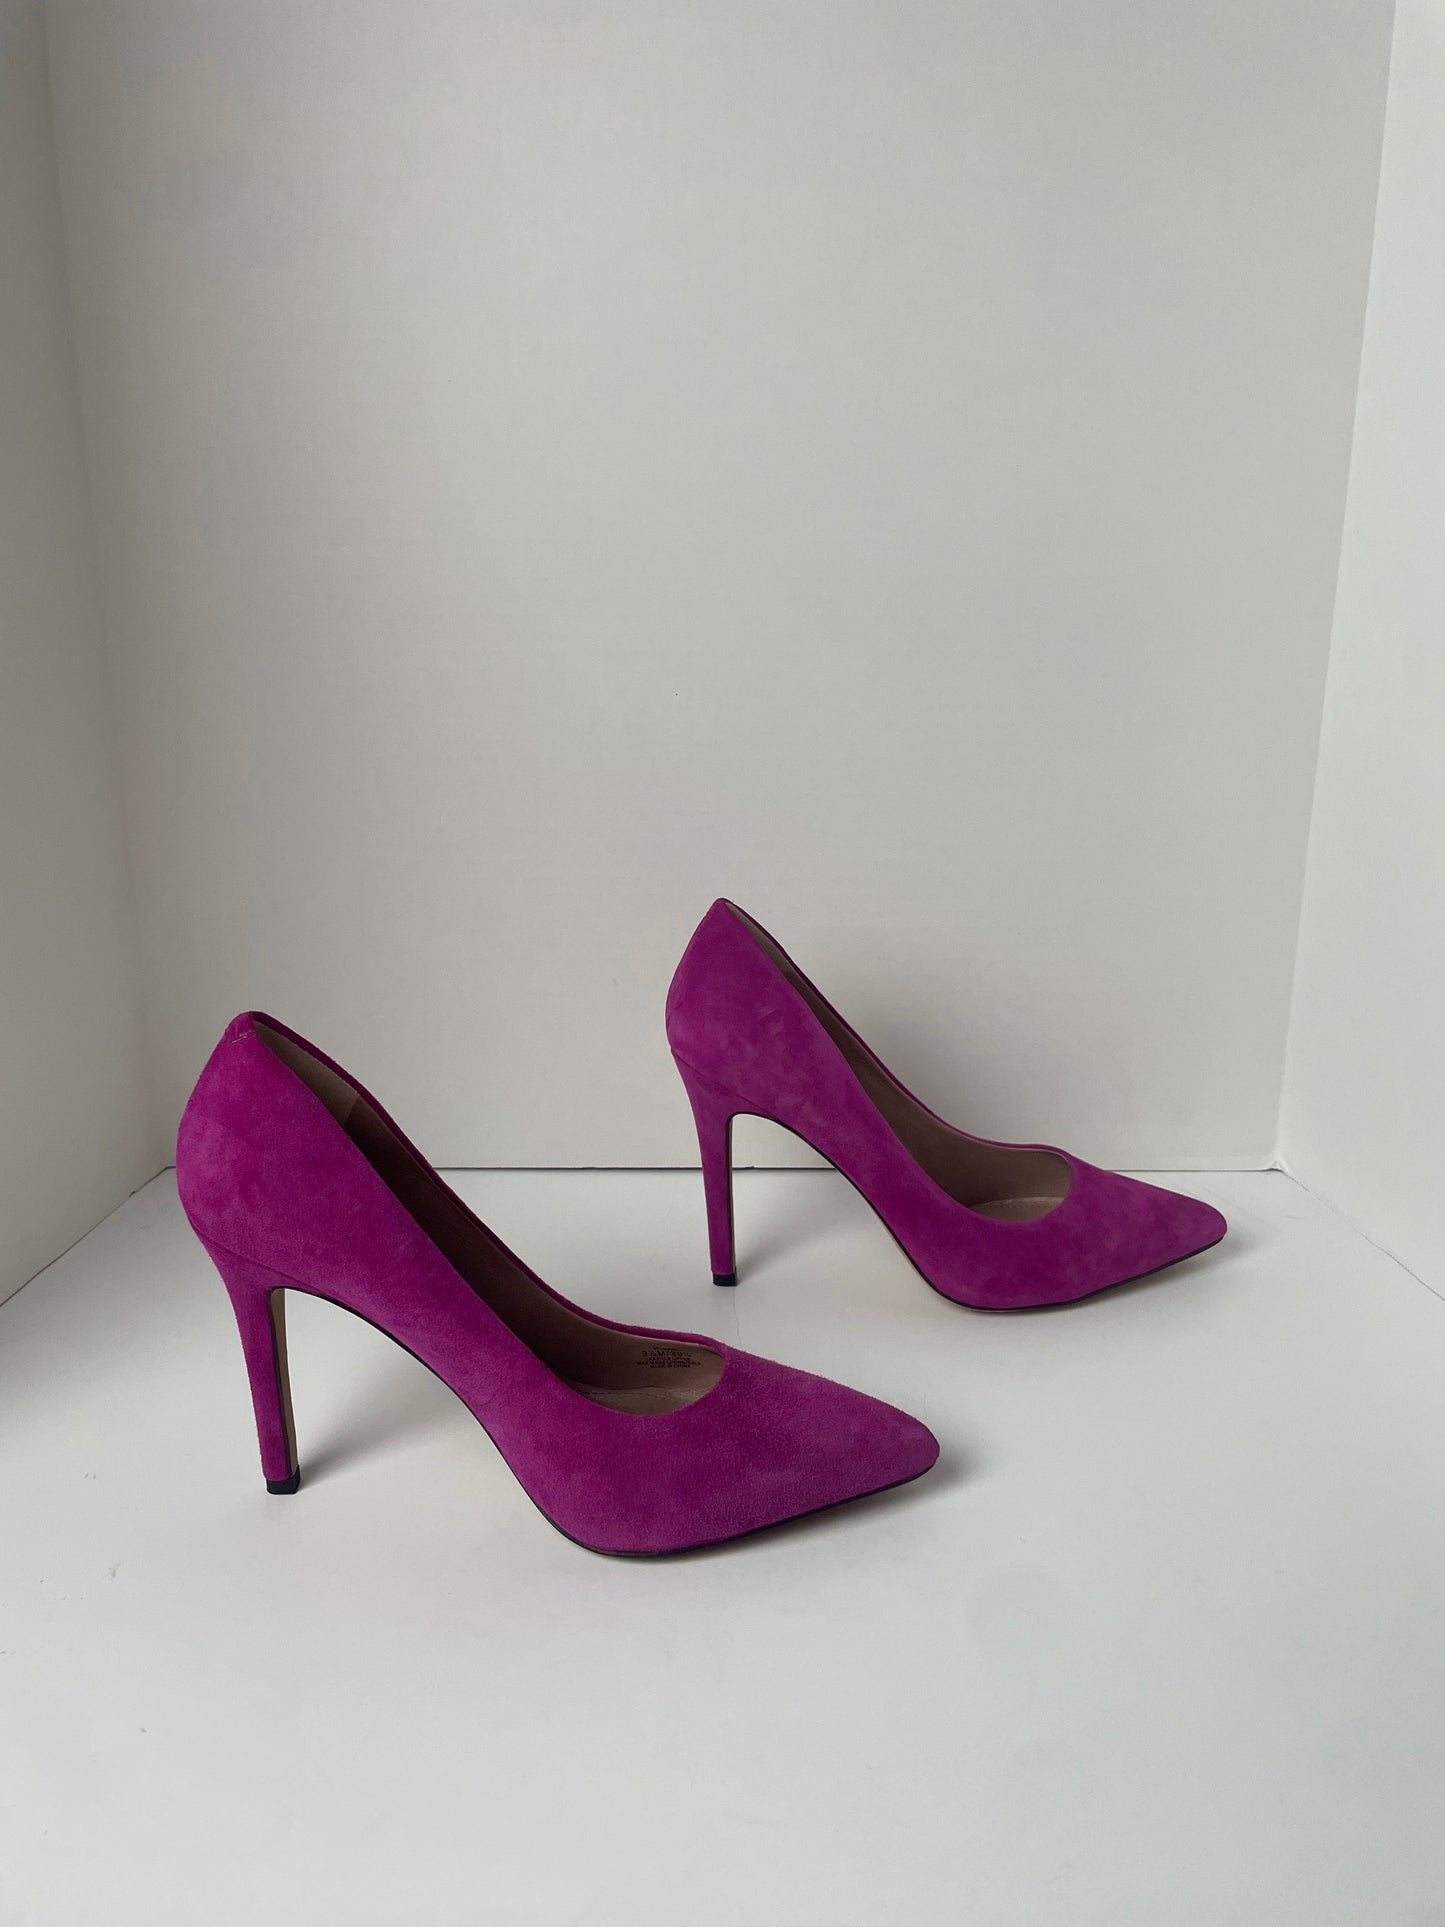 Pink Shoes Heels Stiletto Vince Camuto, Size 9.5